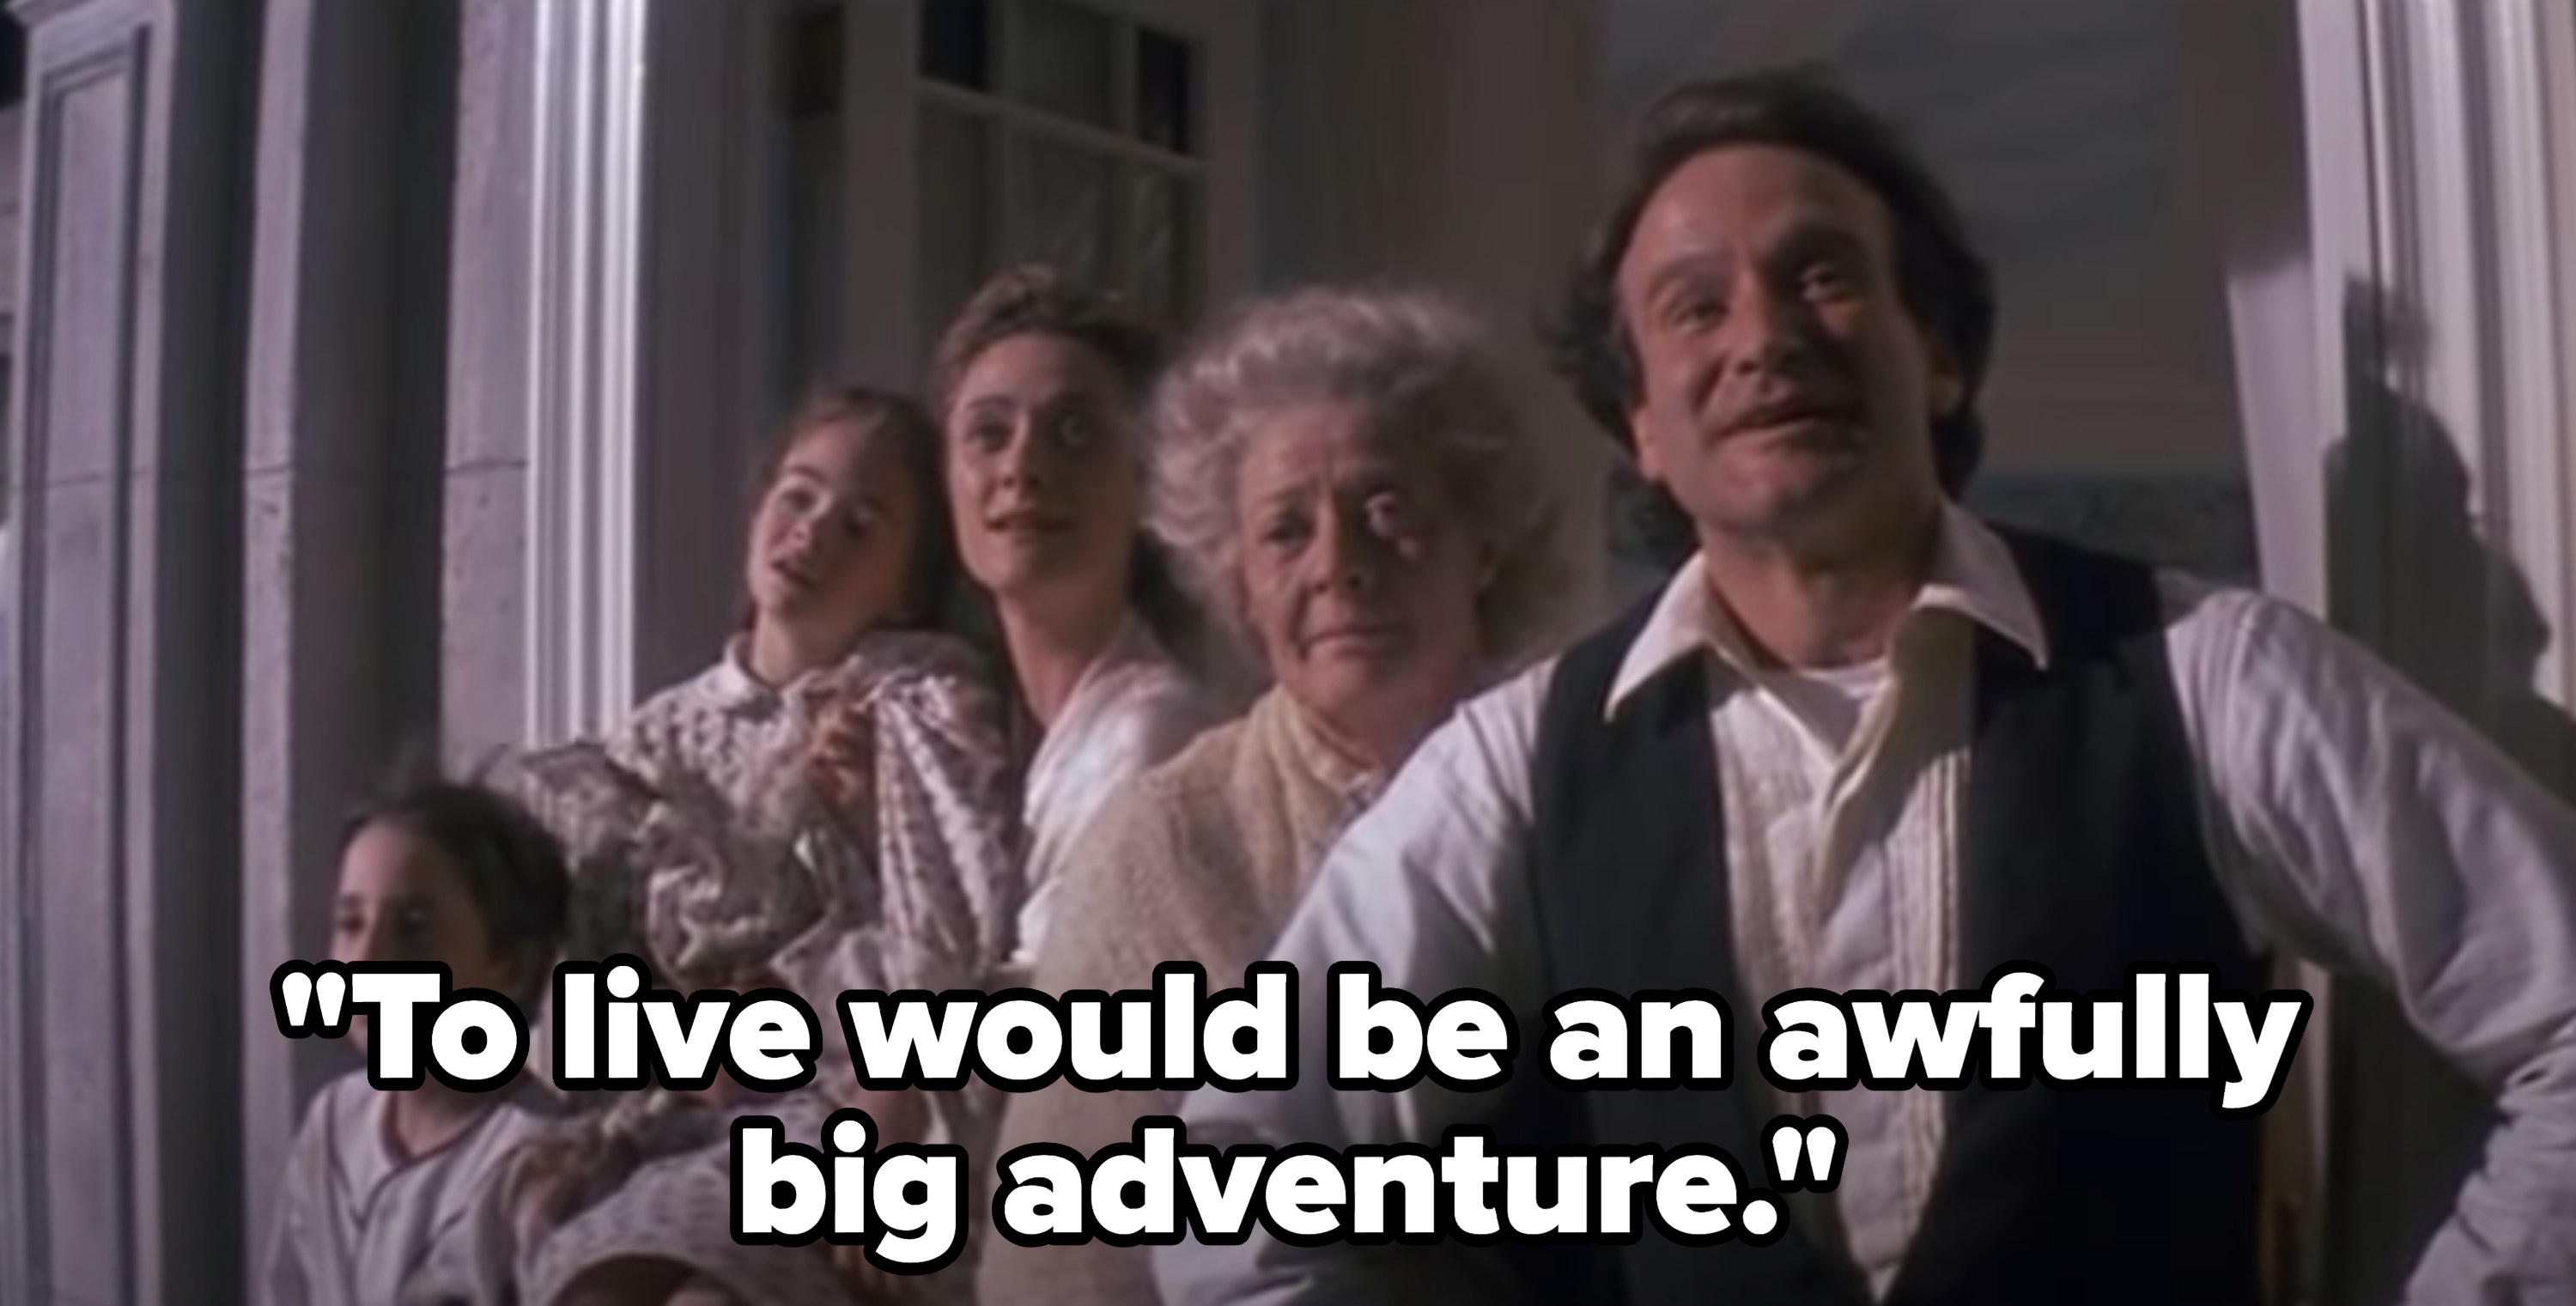 &quot;To live would be an awfully big adventure&quot;